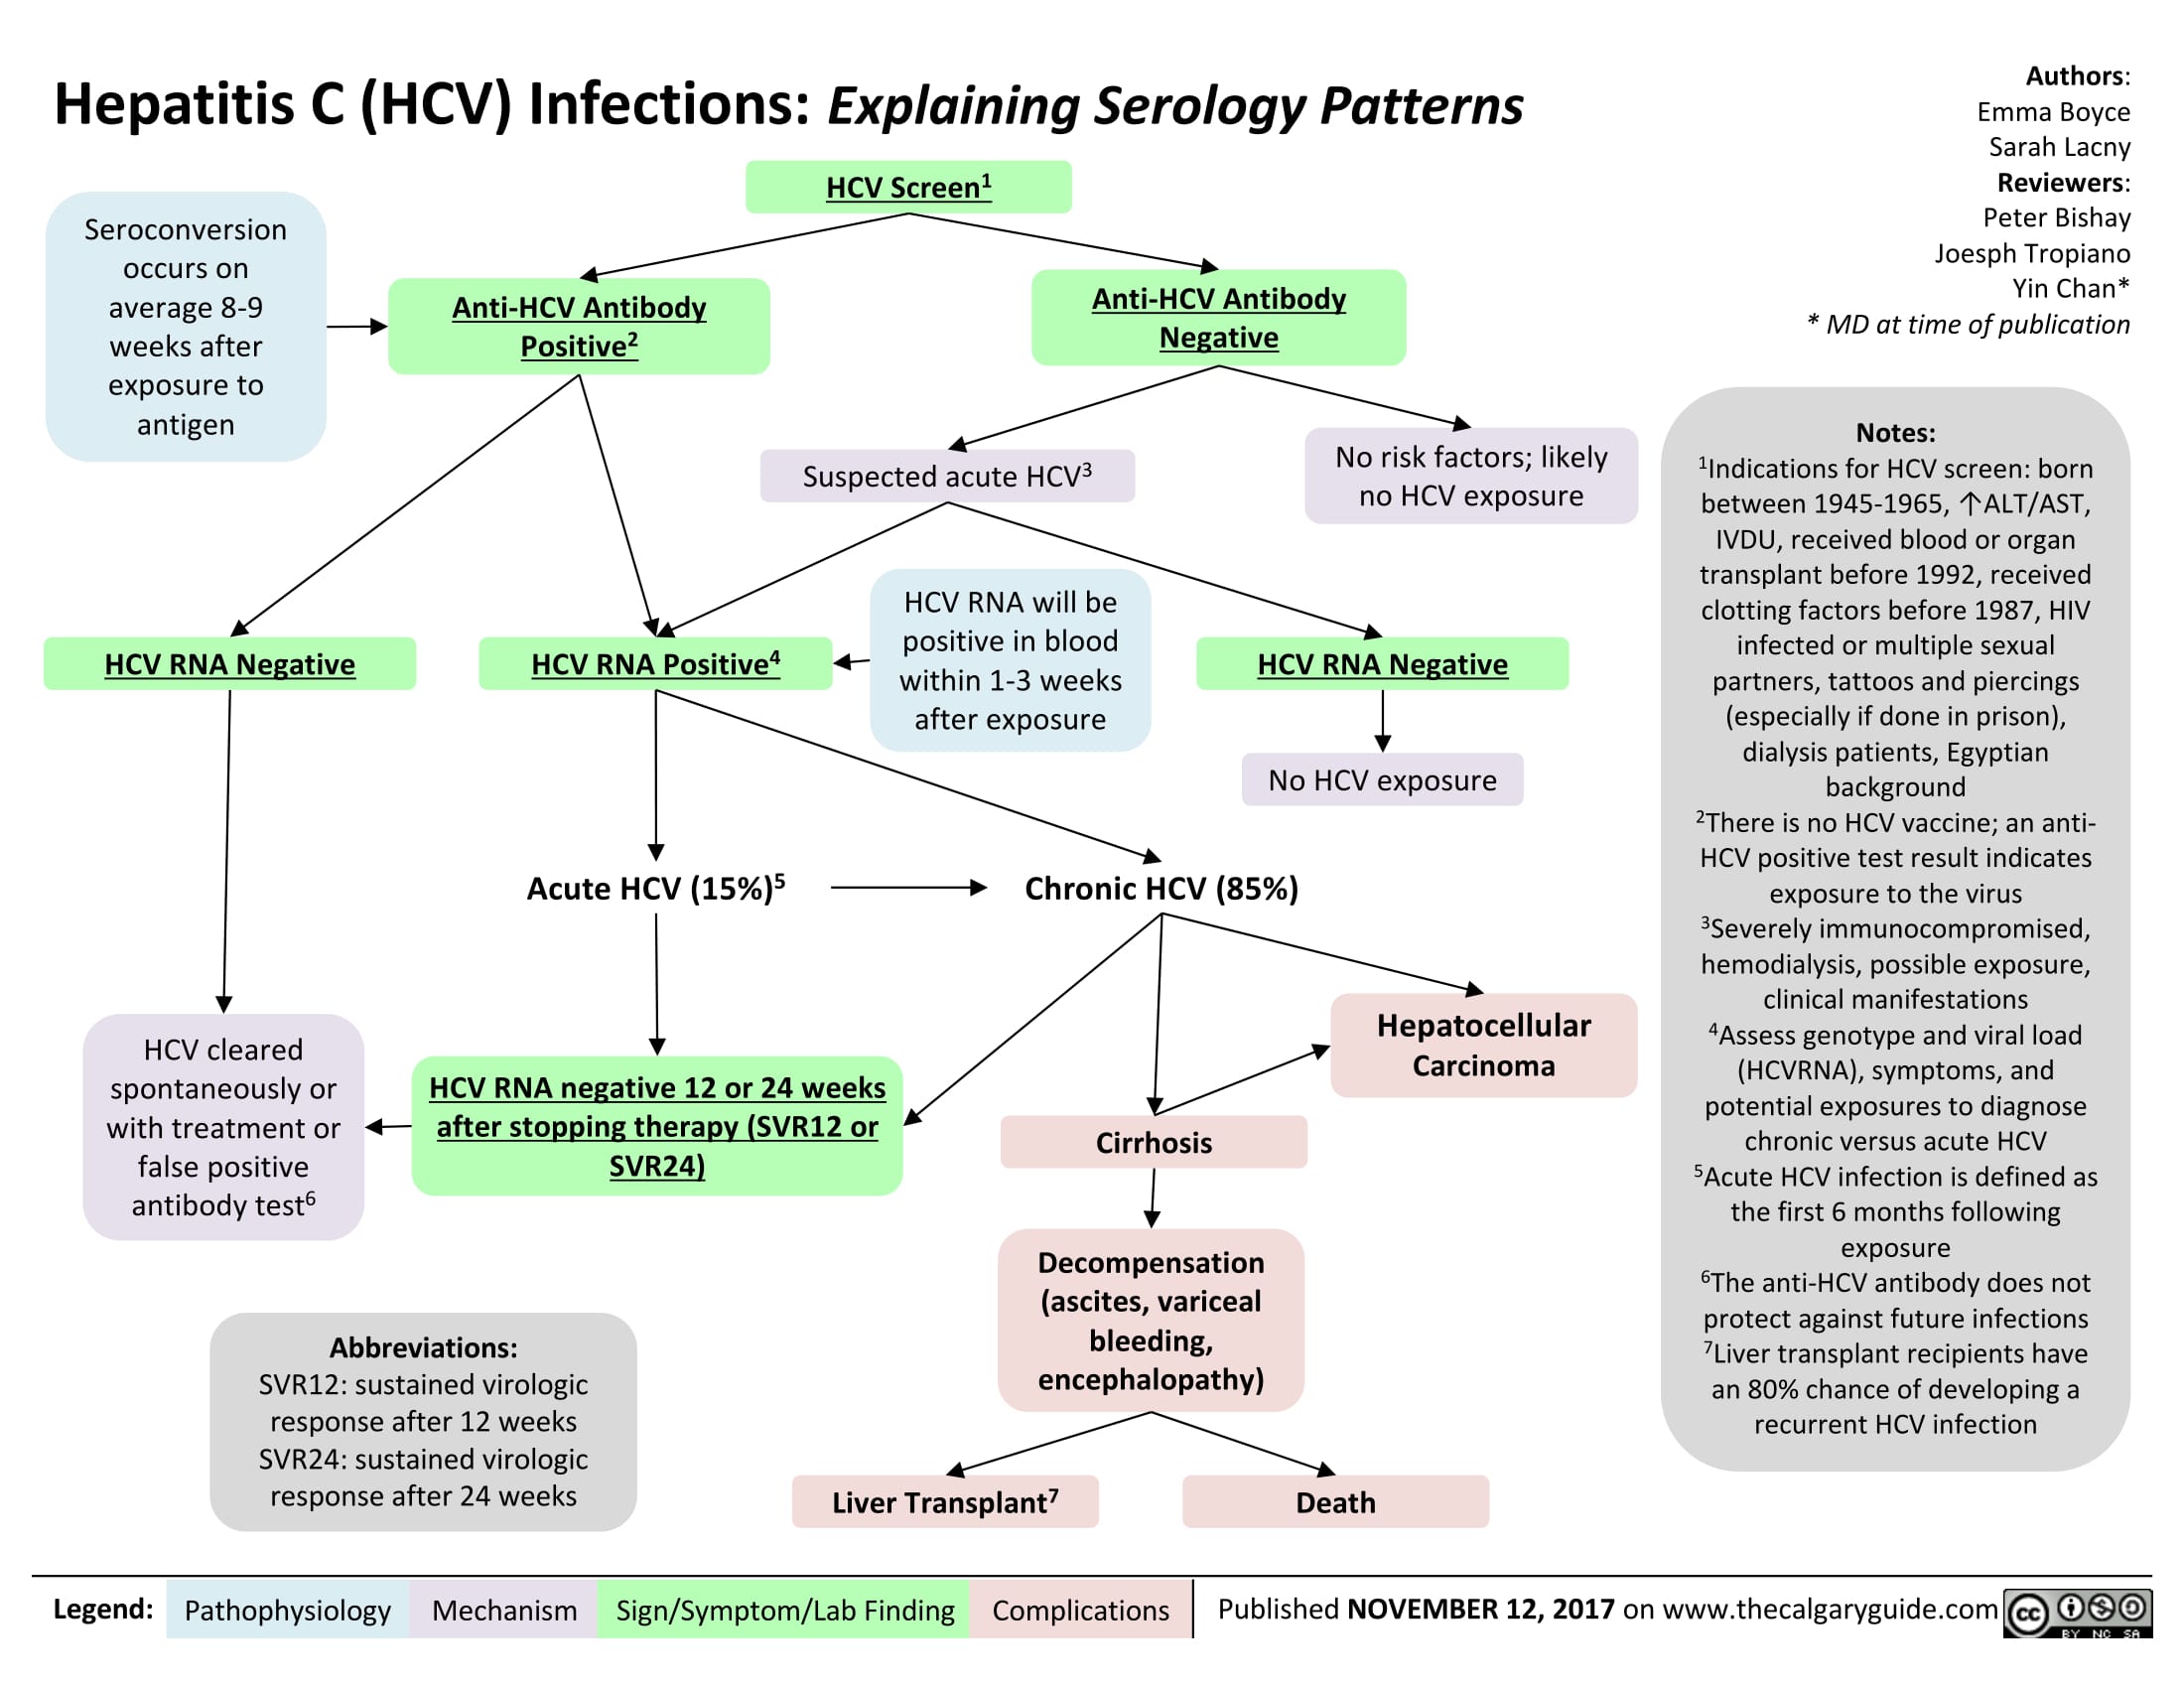 Hepatitis C (HCV) Infections: Explaining Serology Patterns 

Seroconversion occurs on average 8-9 weeks after exposure to antigen 
H CV RNA Negative 
Anti-HCV Antibody Positive2 
HCV RNA Positive4 
1 HCV Screen  
Anti-HCV Antibody Negative  
Suspected acute HCV3 
HCV RNA will be positive in blood within 1-3 weeks after exposure 
No risk factors; likely no HCV exposure 
HCV RNA Negative 
No HCV exposure 

HCV cleared spontaneously or with treatment or false positive antibody test6 
Acute HCV (15%) 5Chronic HCV (85%) 


HCV RNA negative 12 or 24 weeks after stopping therapy (SVR12 or  SVR24)  
Abbreviations: SVR12: sustained virologic response after 12 weeks SVR24: sustained virologic response after 24 weeks 
Hepatocellular Carcinoma 
Cirrhosis 

Decompensation (ascites, variceal bleeding, encephalopathy) 
7 Liver Transplant 
Death 
Authors: Emma Boyce Sarah Lacny Reviewers: Peter B i s h ay Joesph Tropiano Yin Chan* * MD at time of publication 
Notes: 1Indications for HCV screen: born between 1945-1965, ↑ALT/AST, IVDU, received blood or organ transplant before 1992, received clotting factors before 1987, HIV infected or multiple sexual partners, tattoos and piercings (especially if done in prison), dialysis patients, Egyptian background 2There is no HCV vaccine; an anti-HCV positive test result indicates exposure to the virus 3Seve re l y immunocompromised, hemodialysis, possible exposure, clinical manifestations 4Assess genotype and viral load (HCVRNA), symptoms, and potential exposures to diagnose chronic versus acute HCV 5Acute HCV infection is defined as the first 6 months following exposure 6The anti-HCV antibody does not protect against future infections 7Liver transplant recipients have an 80% chance of developing a recurrent HCV infection 
Legend: 
Pathophysiology 
Mechanism 
Sign/Symptom/Lab Finding 
Complications 
Published NOVEMBER 12, 2017 on www.thecalgaryguide.com 
